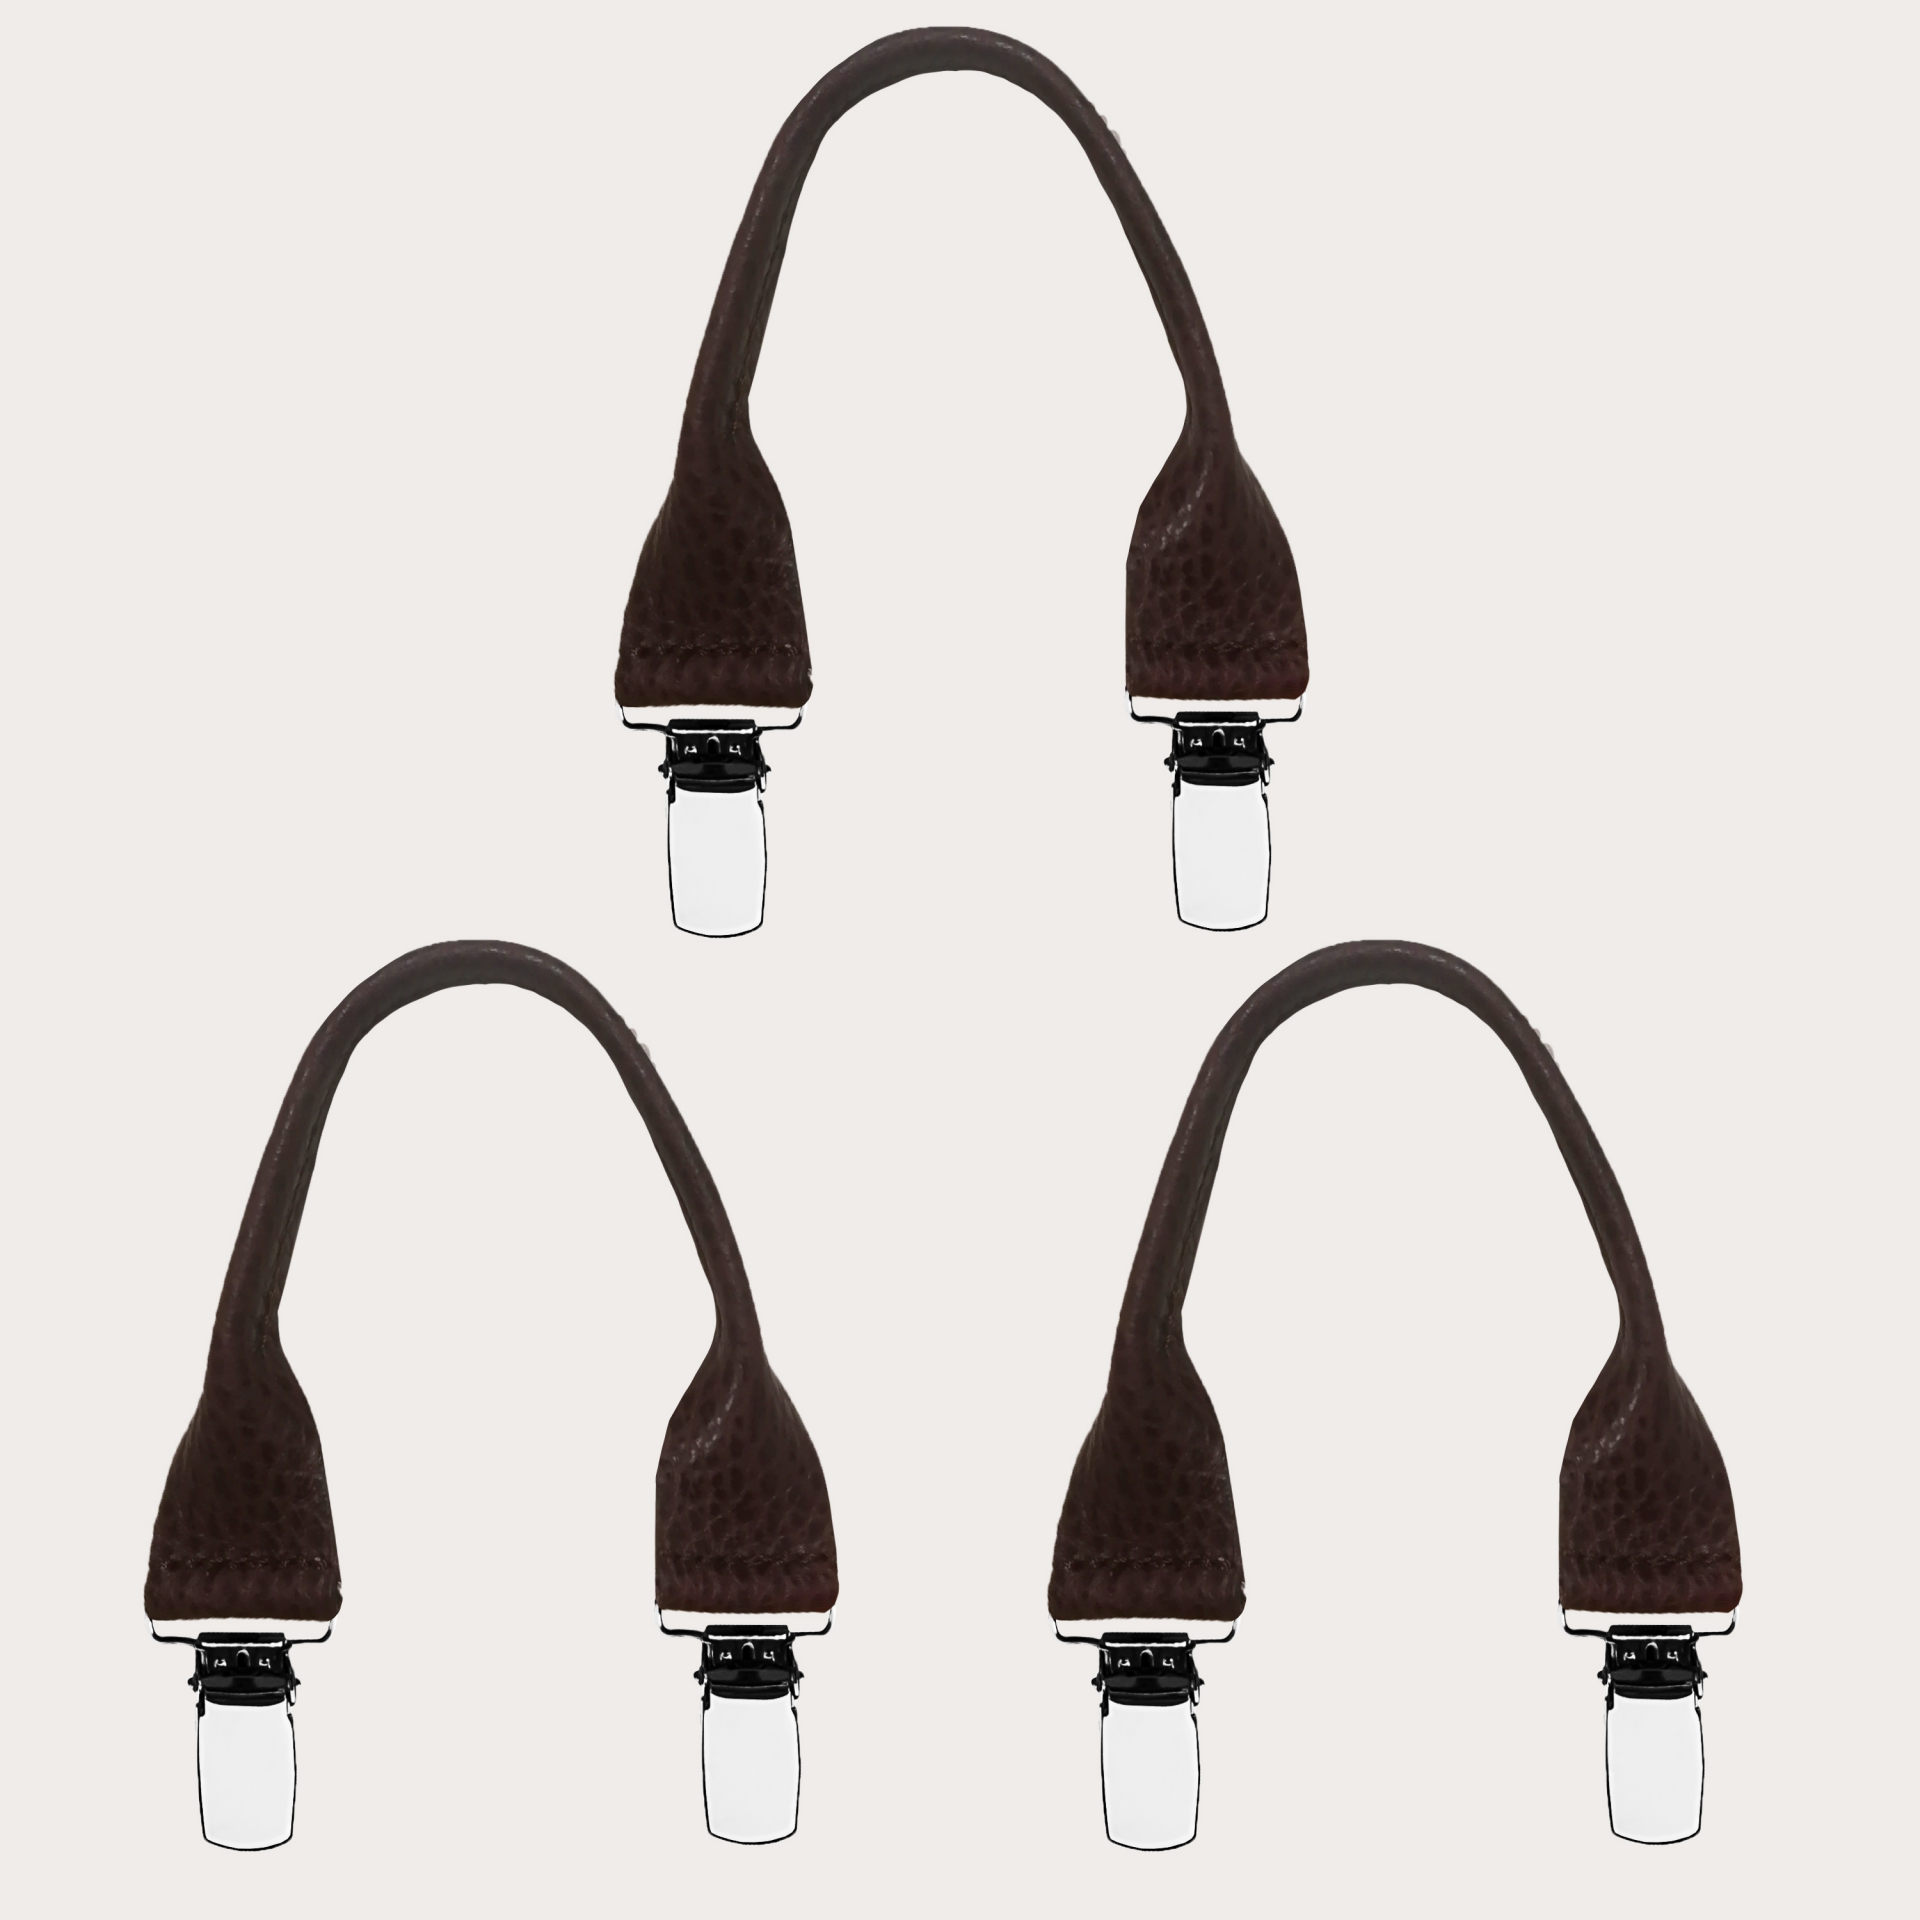 BRUCLE Tumbled leather mustache connectors with clips, 3 pcs., dark brown